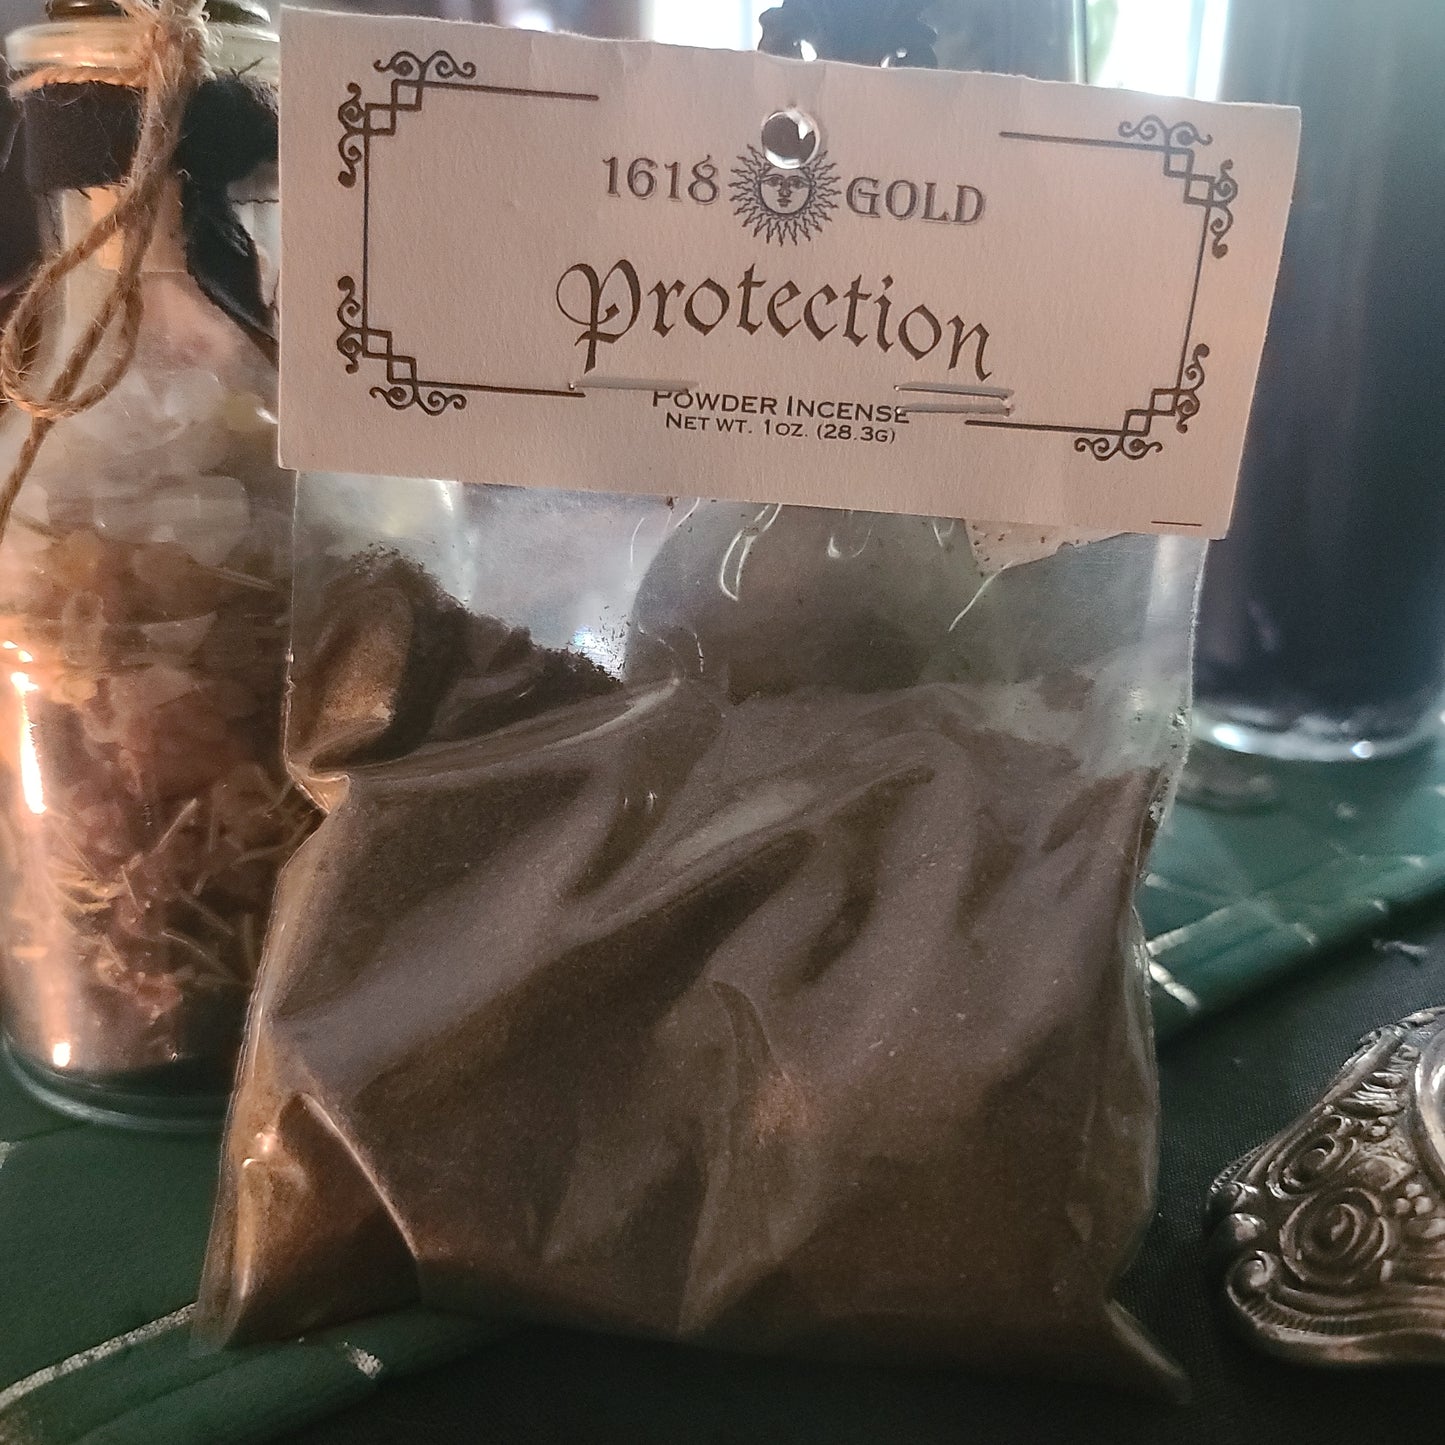 1618 Gold - PROTECTION - Powder Incense for majickal protection